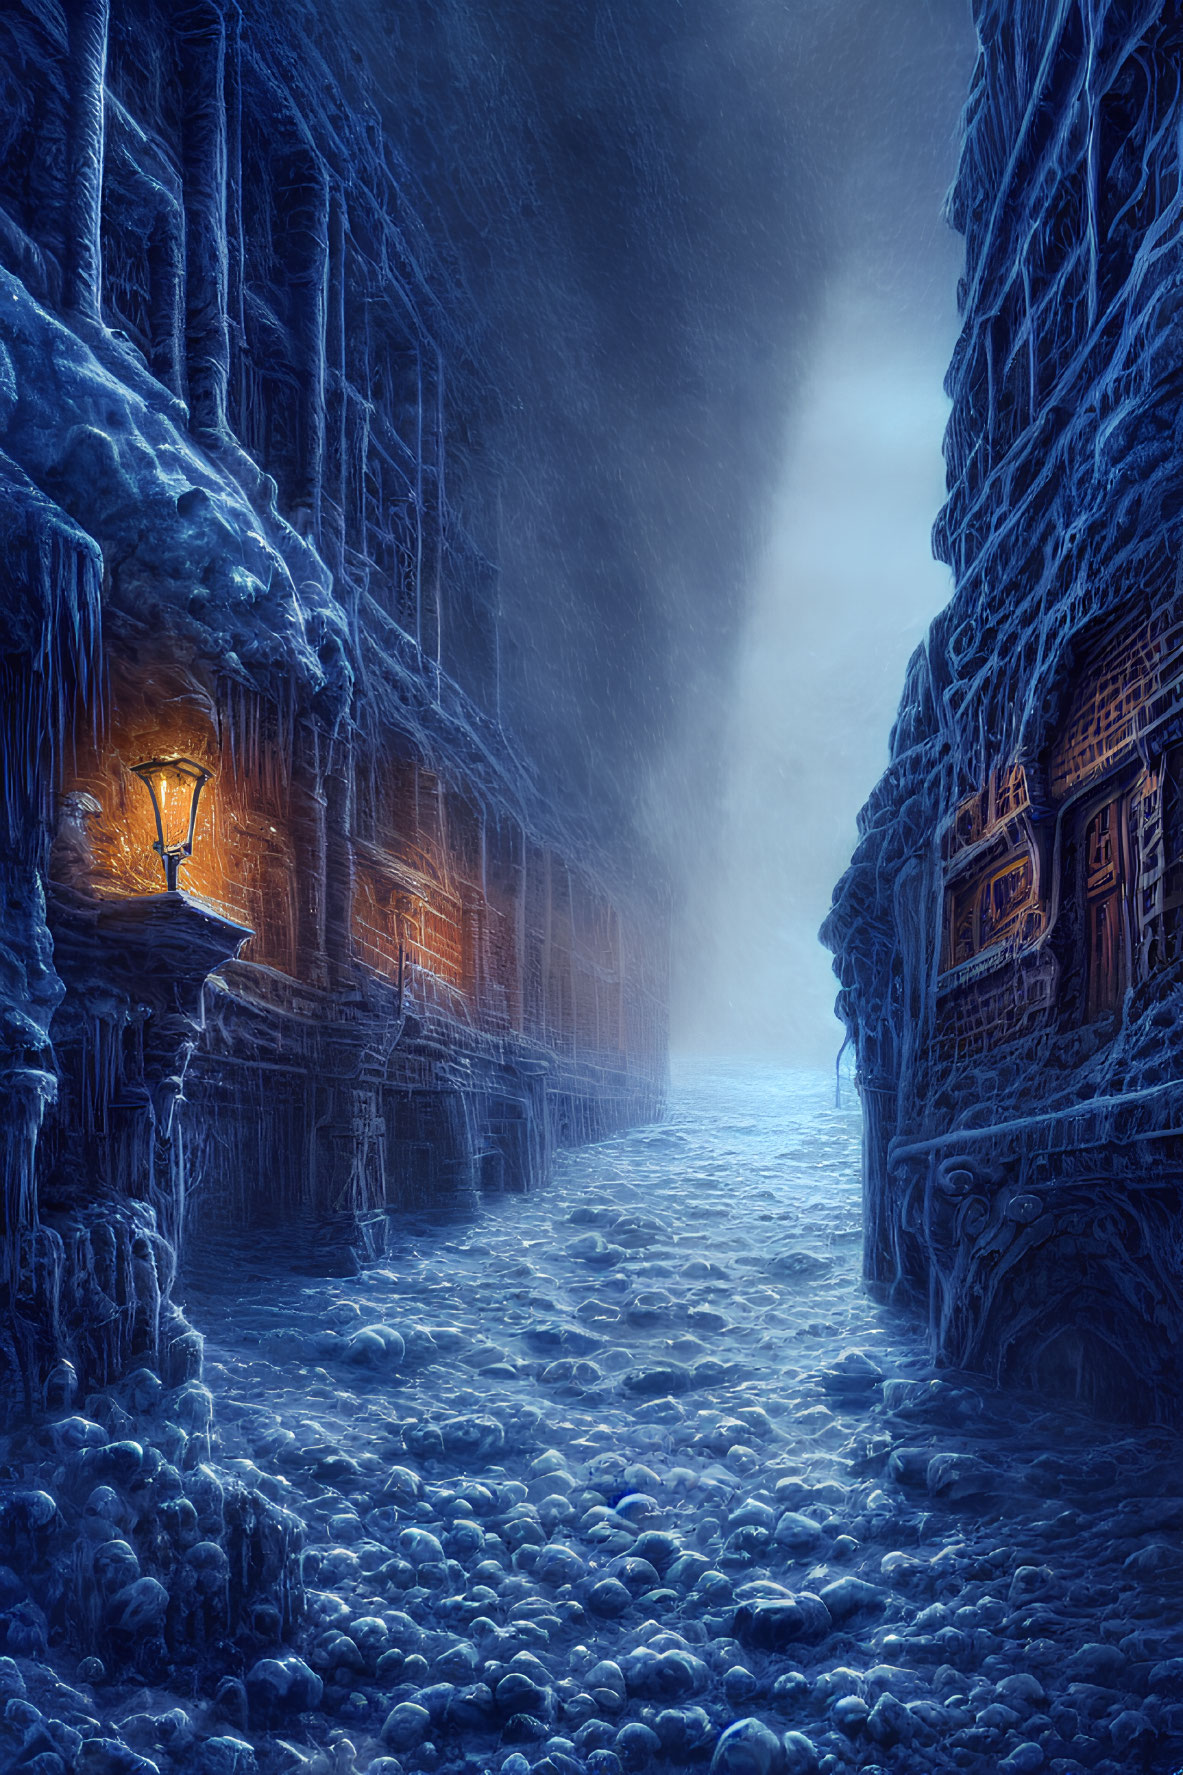 Twilight cobblestone alleyway with lantern light and ice-covered buildings